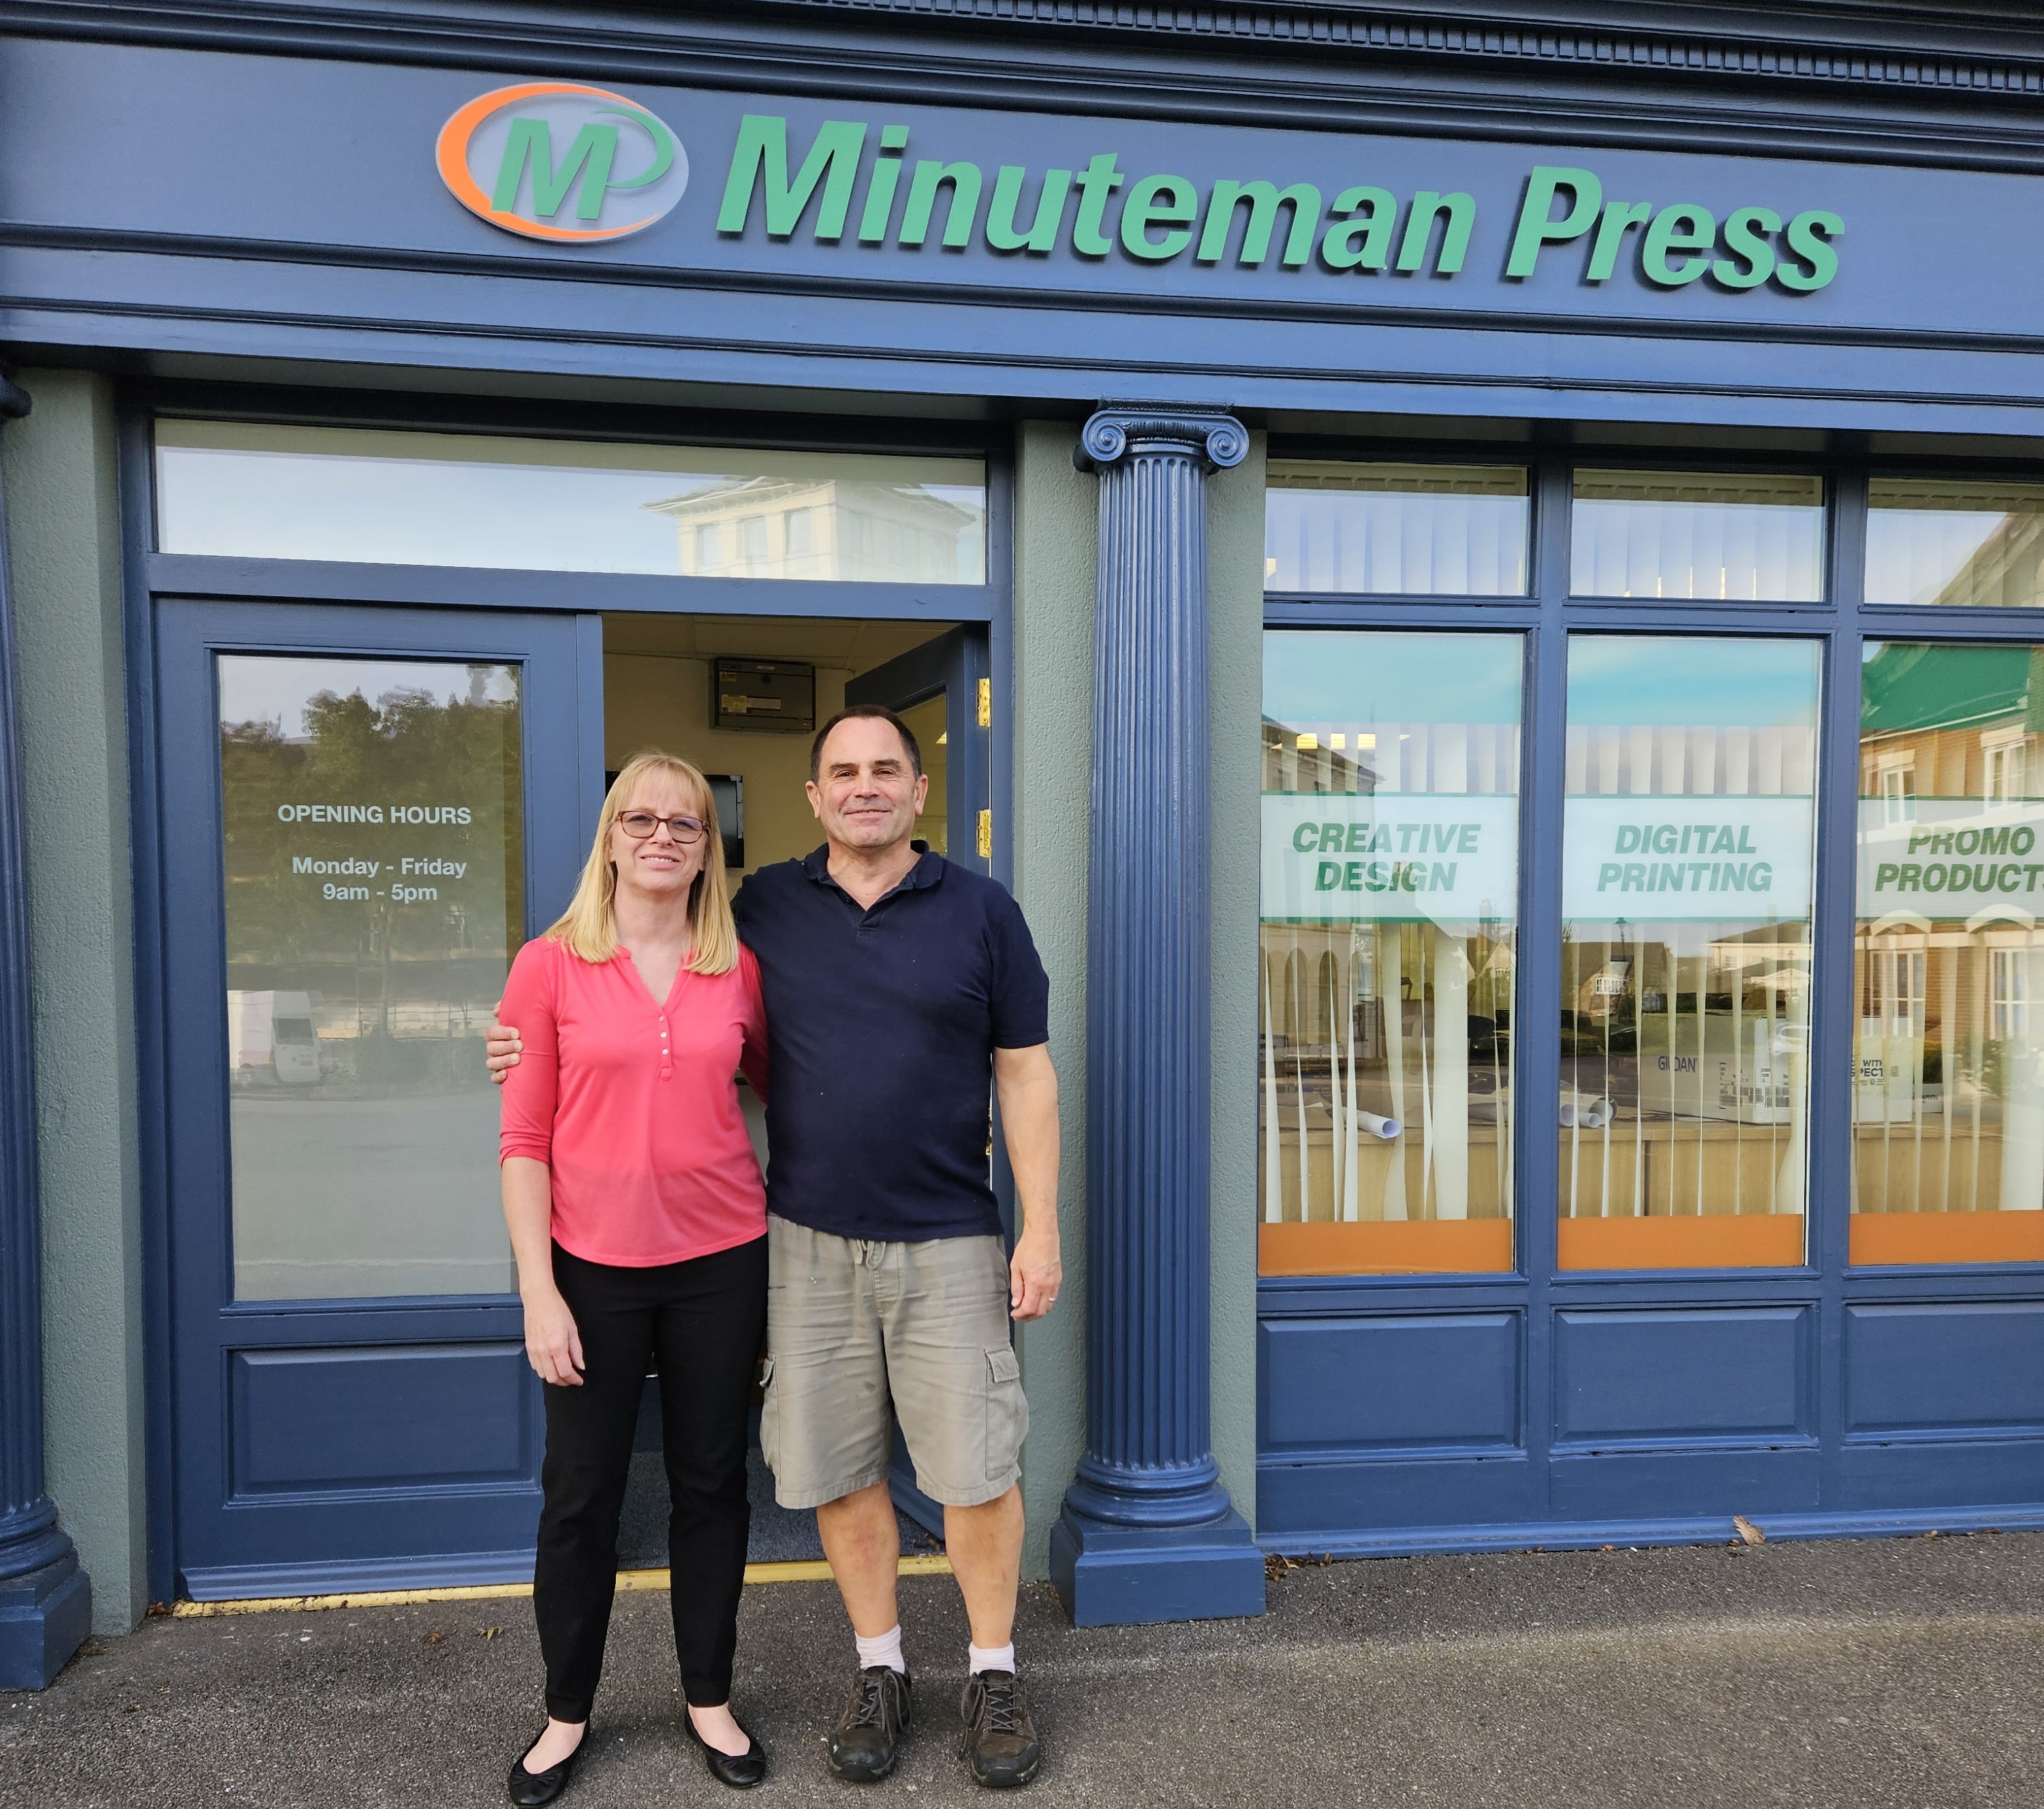 Owners Juanita and David Prince outside their new location for Minuteman Press in Poundbury and Dorchester.